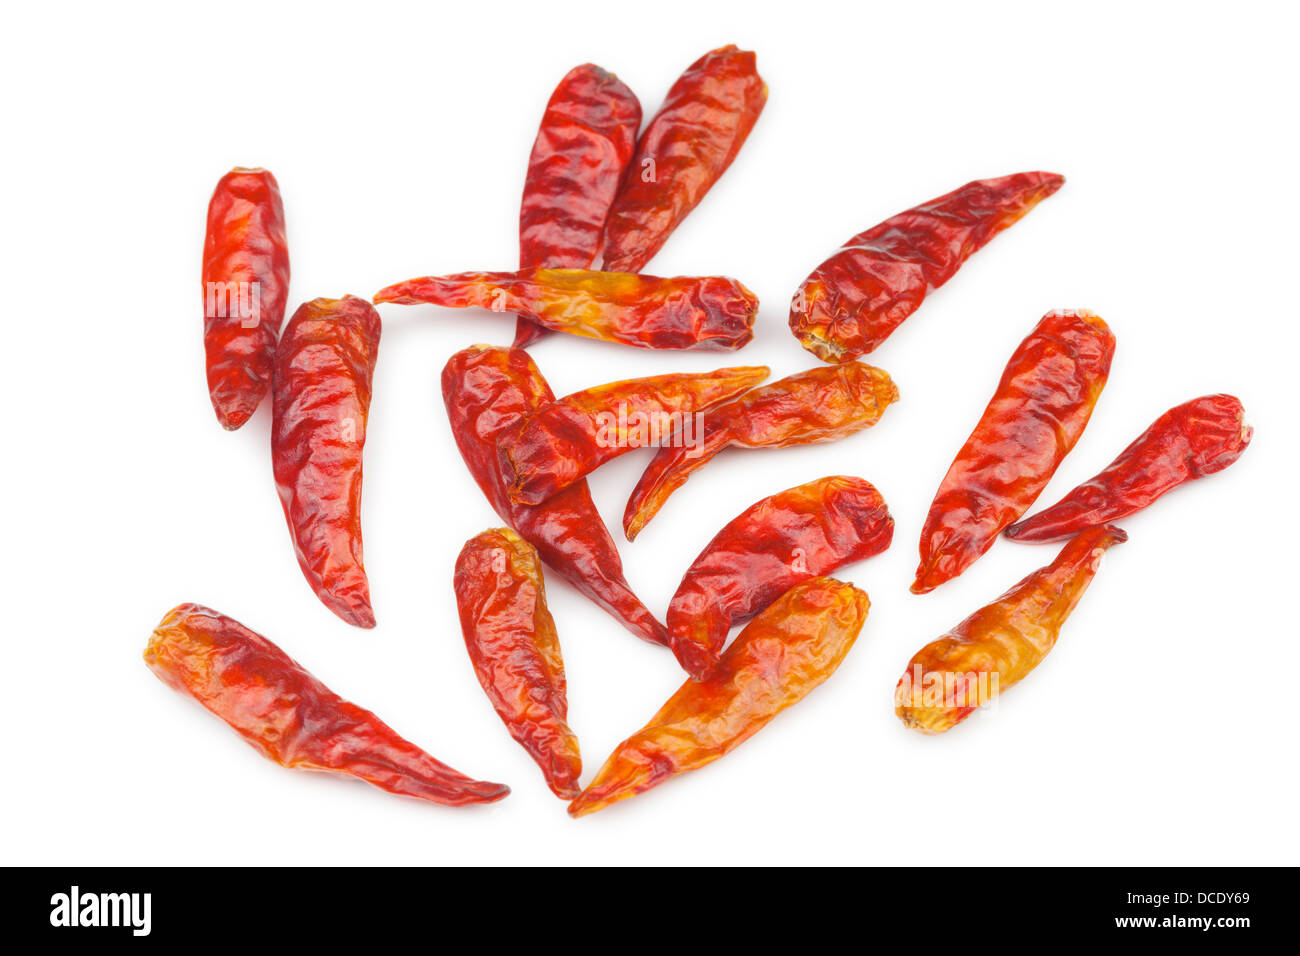 Dried red chili peppers from Vietnam Stock Photo